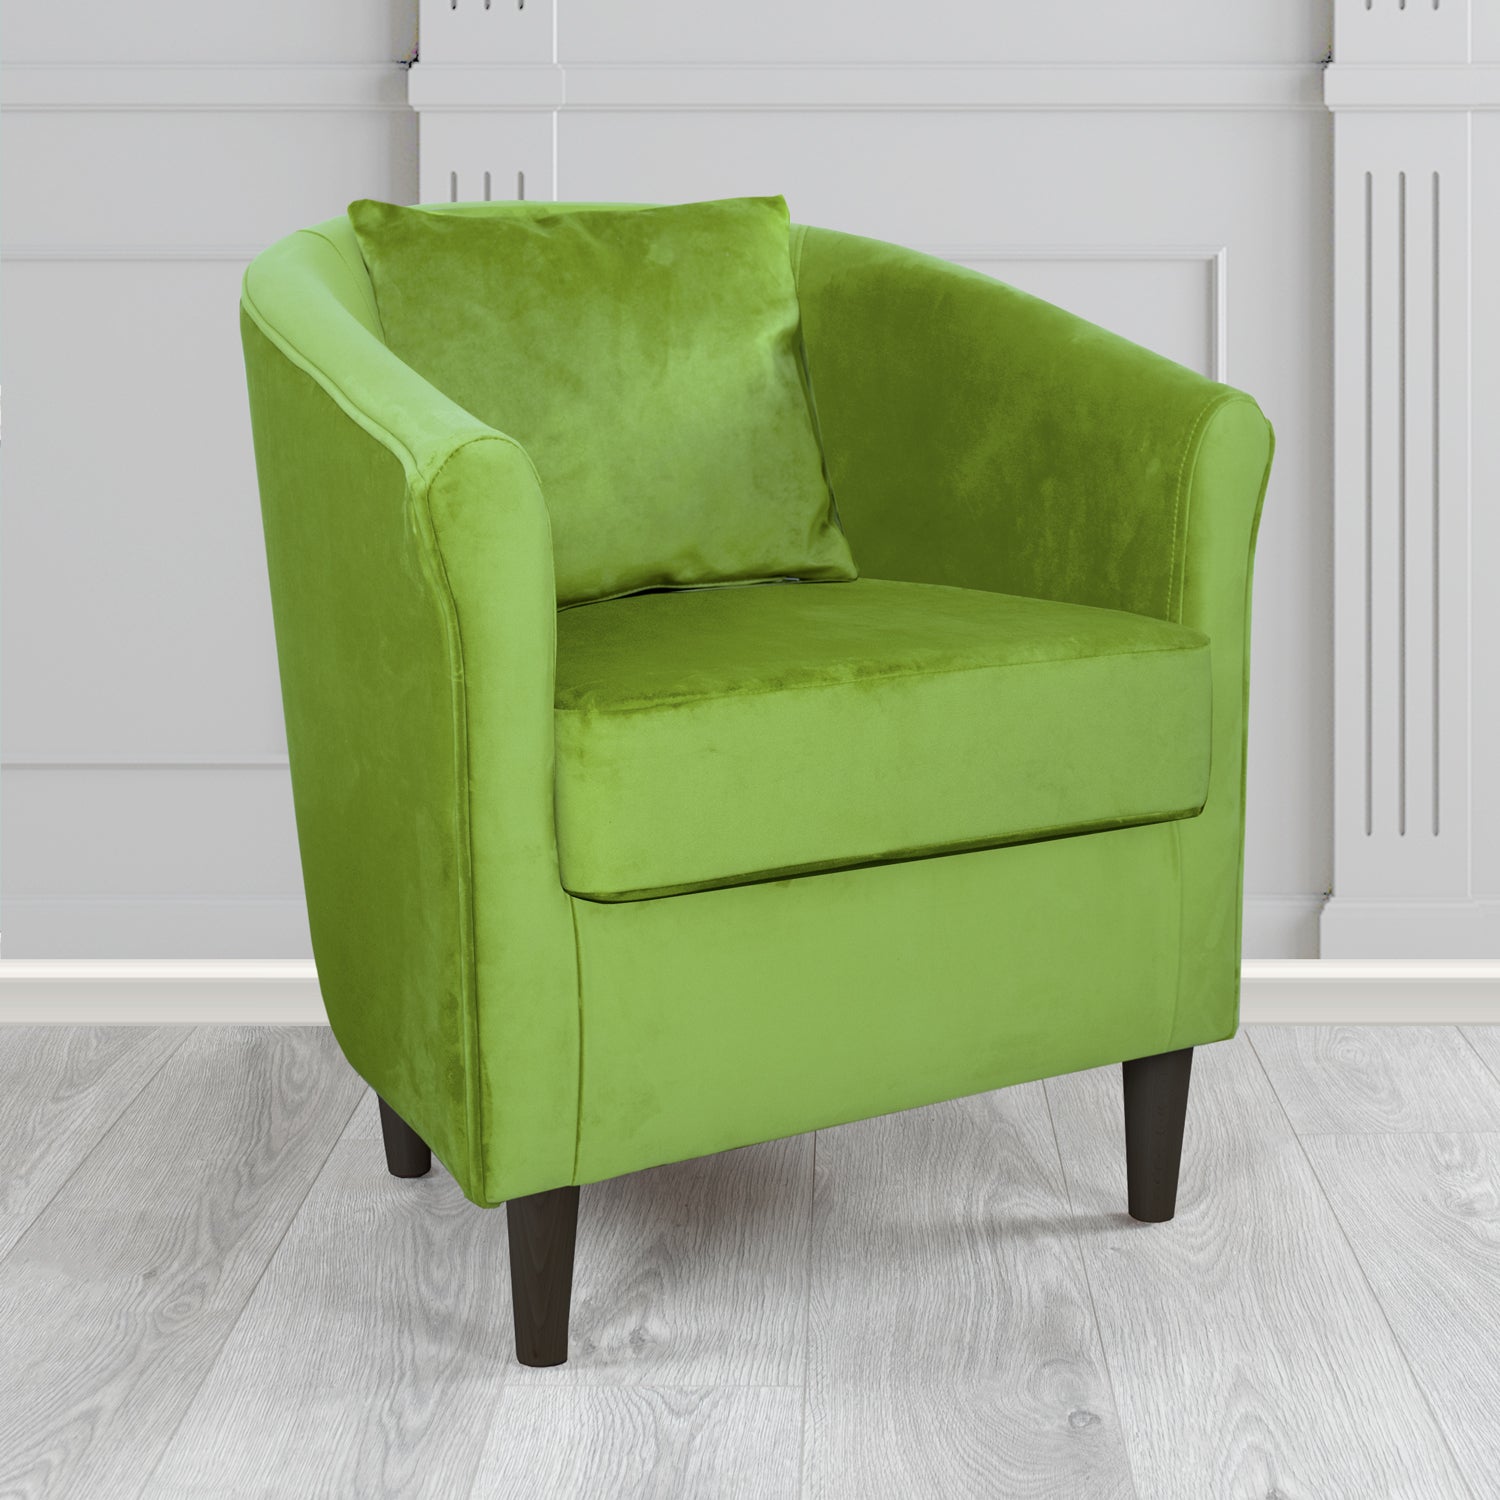 Express St Tropez Monaco Olive Plush Velvet Fabric Tub Chair with Scatter Cushion (6604856197162)